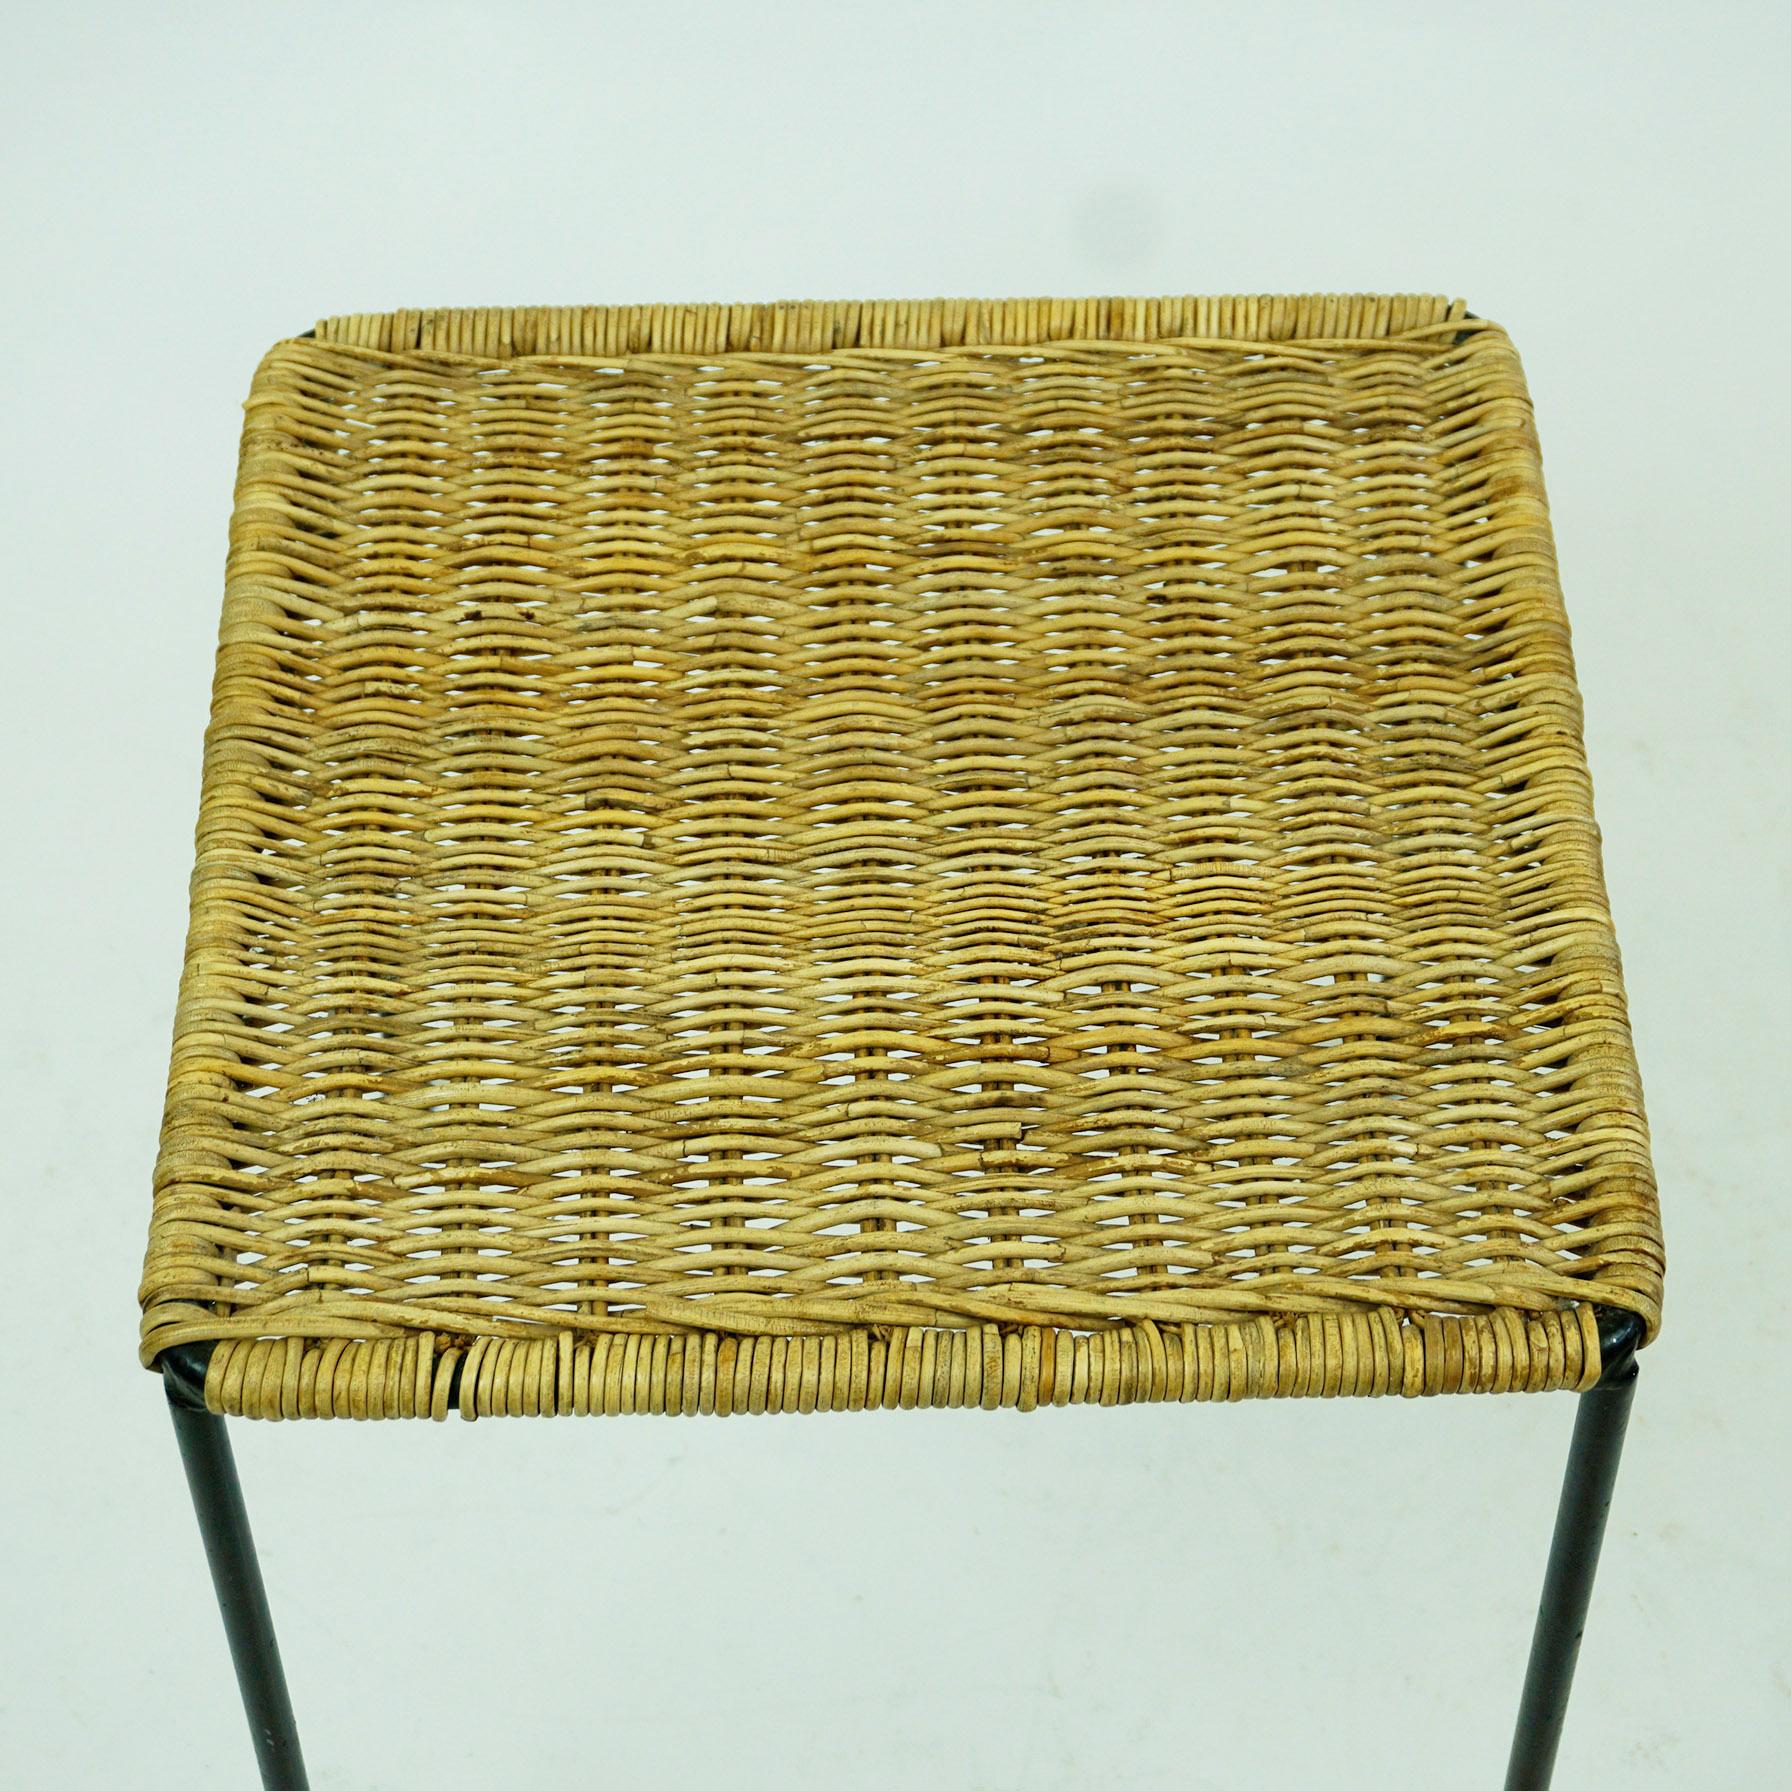 Mid-20th Century Austrian Midcentury Black Steel and Wicker Side Table or Stool by Carl Auböck